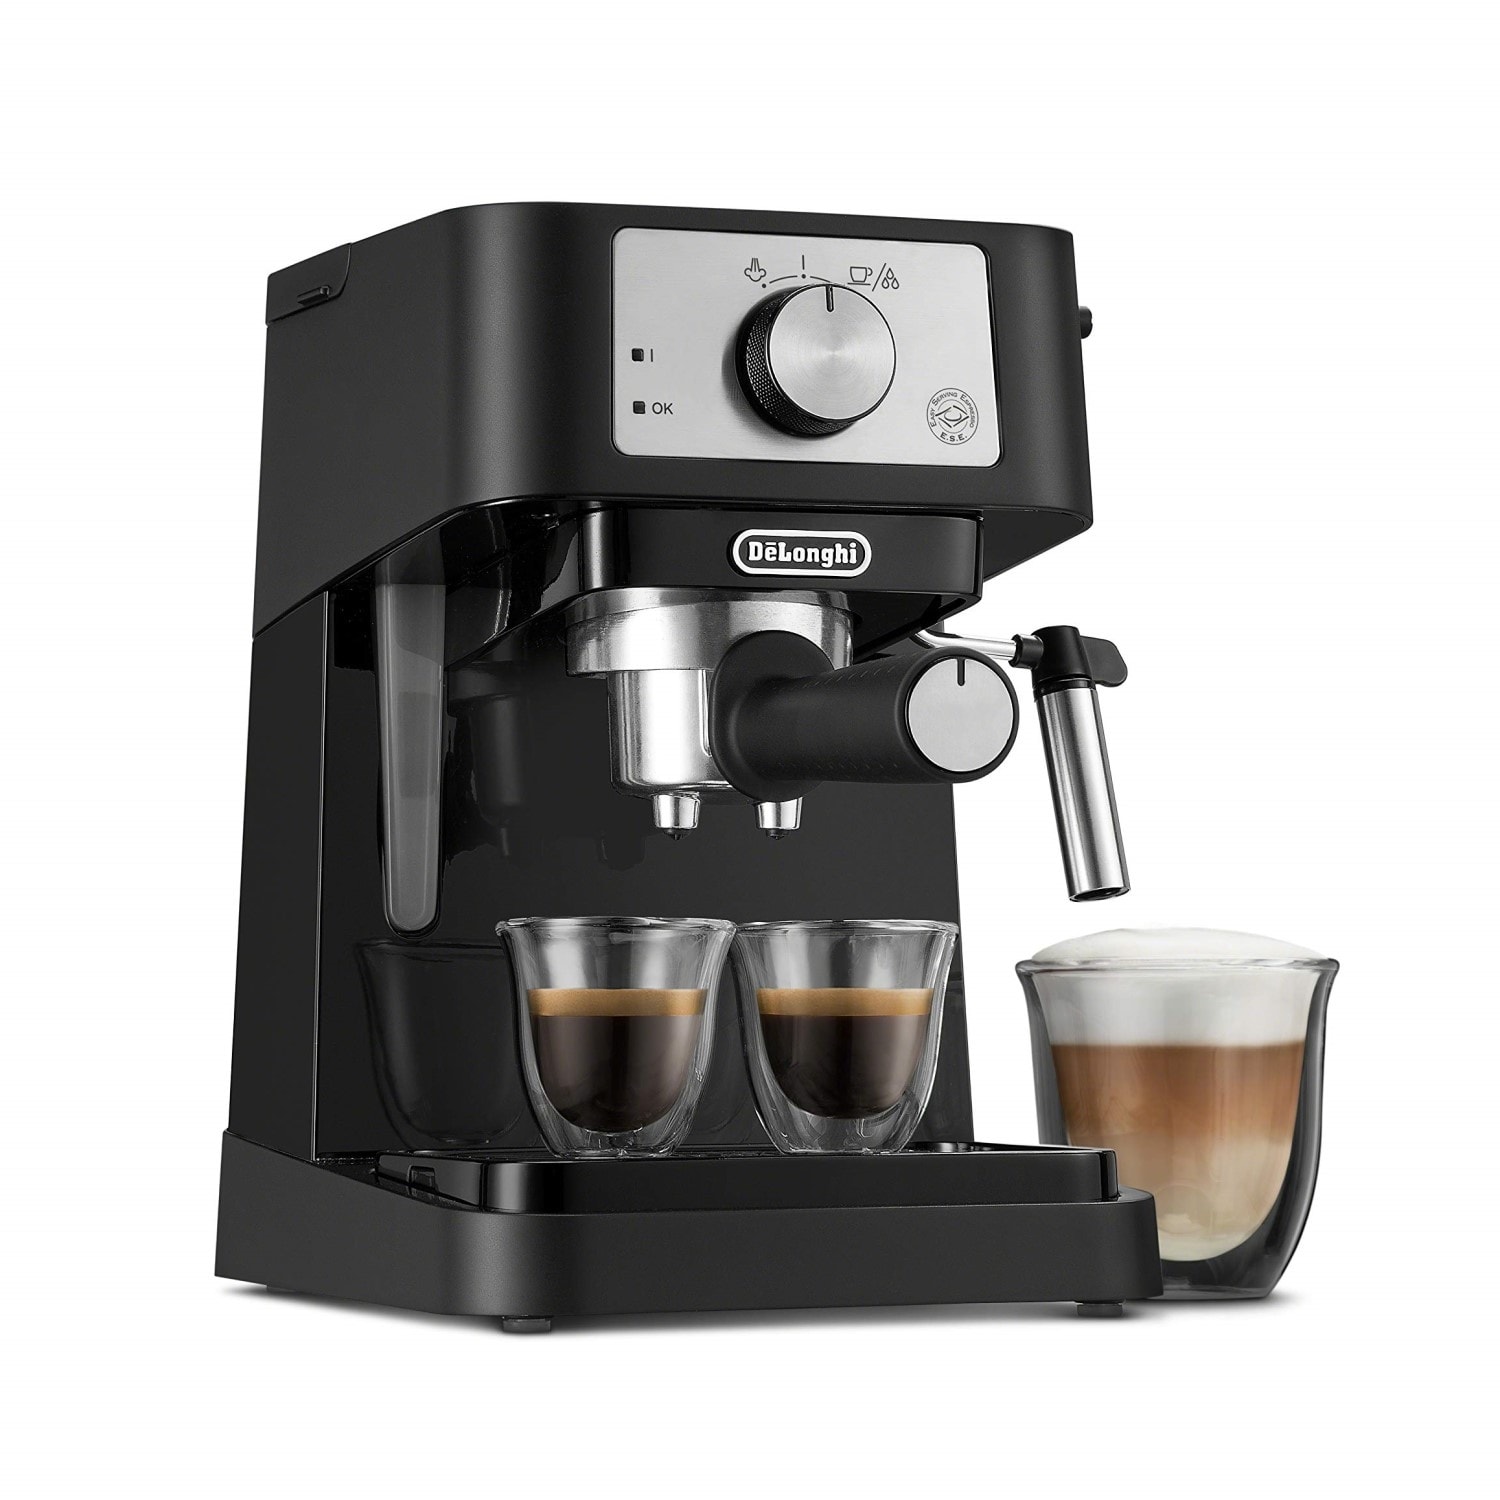 https://ak1.ostkcdn.com/images/products/is/images/direct/11cce7ba5546f9a1c691f98d53369ce045c650f7/Manual-Espresso-Machine%2C-15-Bar-Pump-Pressure-%2B-Milk-Frother-Steam-Wand.jpg